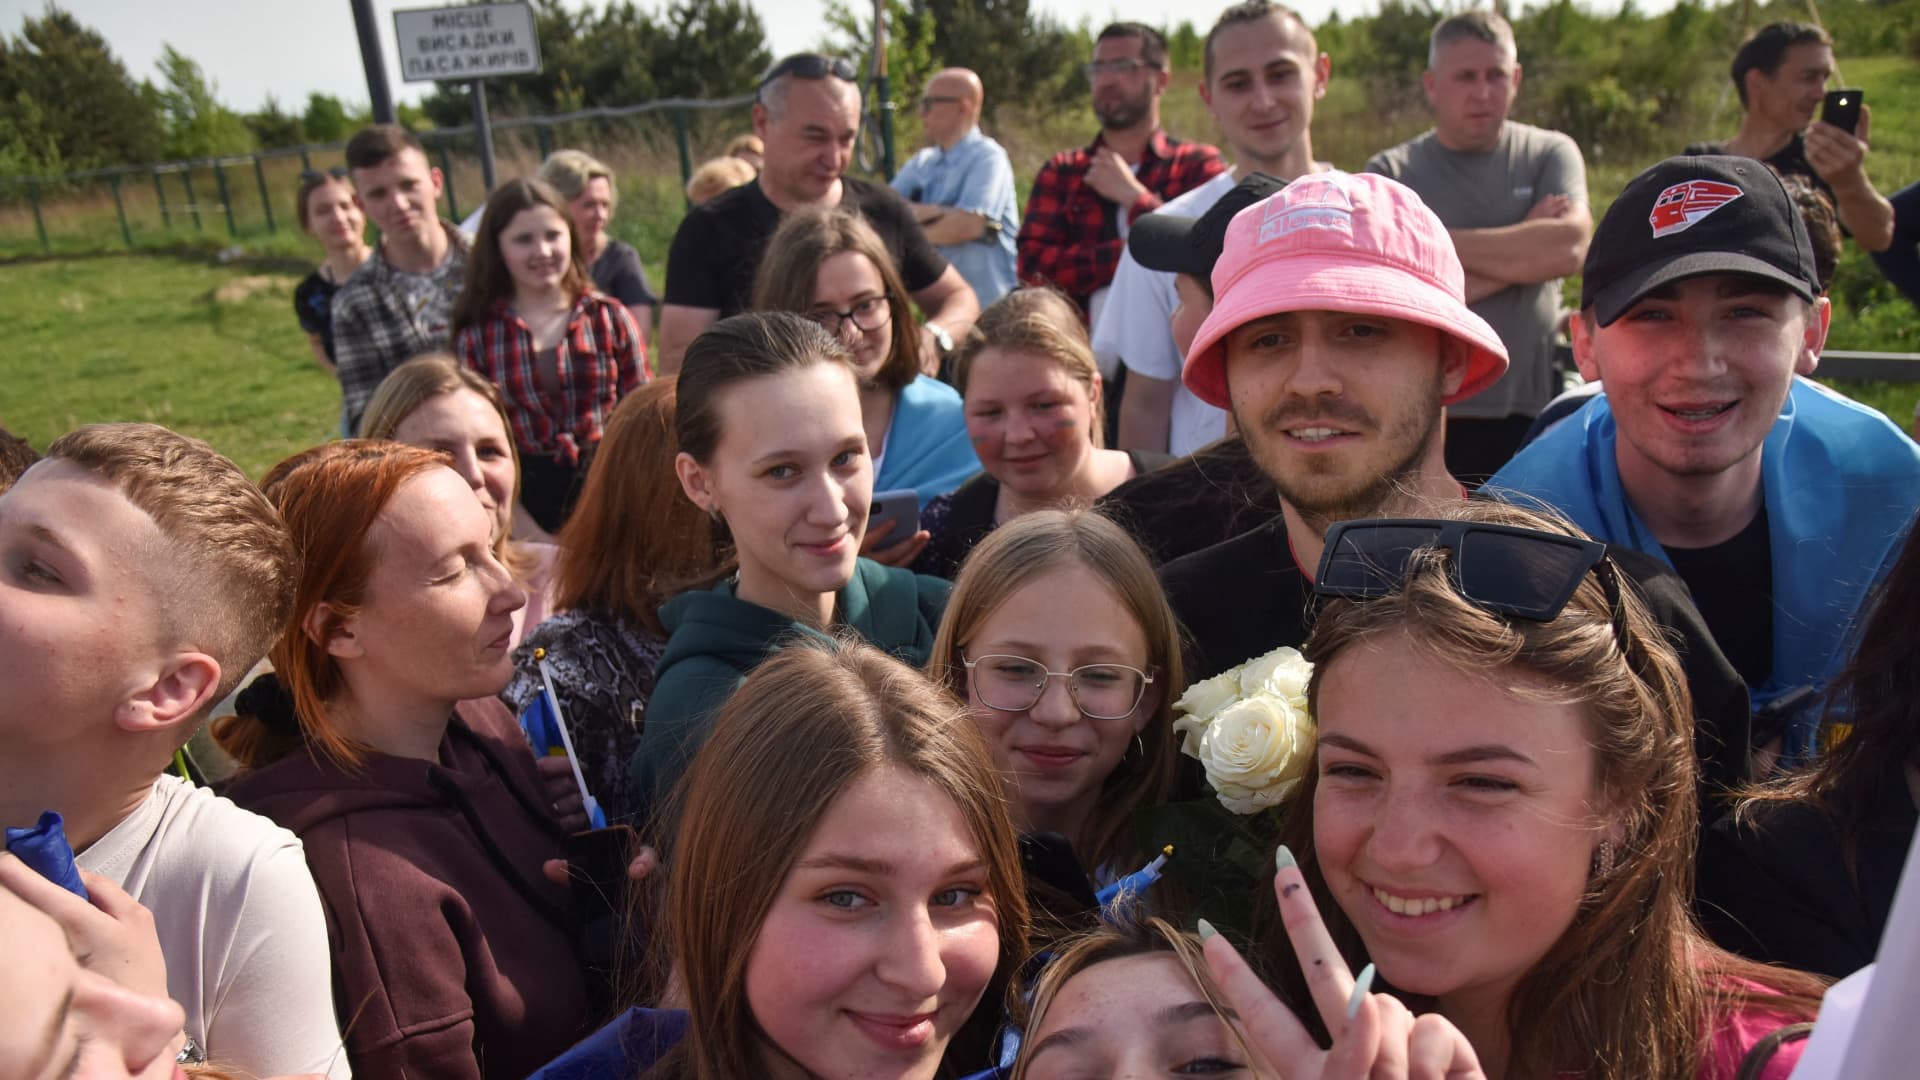 Oleh Psiuk, frontman of the 2022 Eurovision Song Contest winners Kalush Orchestra, poses for a picture with Ukrainians as he arrives at the Ukraine-Poland border crossing point near the village of Krakovets, in Lviv region, Ukraine May 16, 2022. 